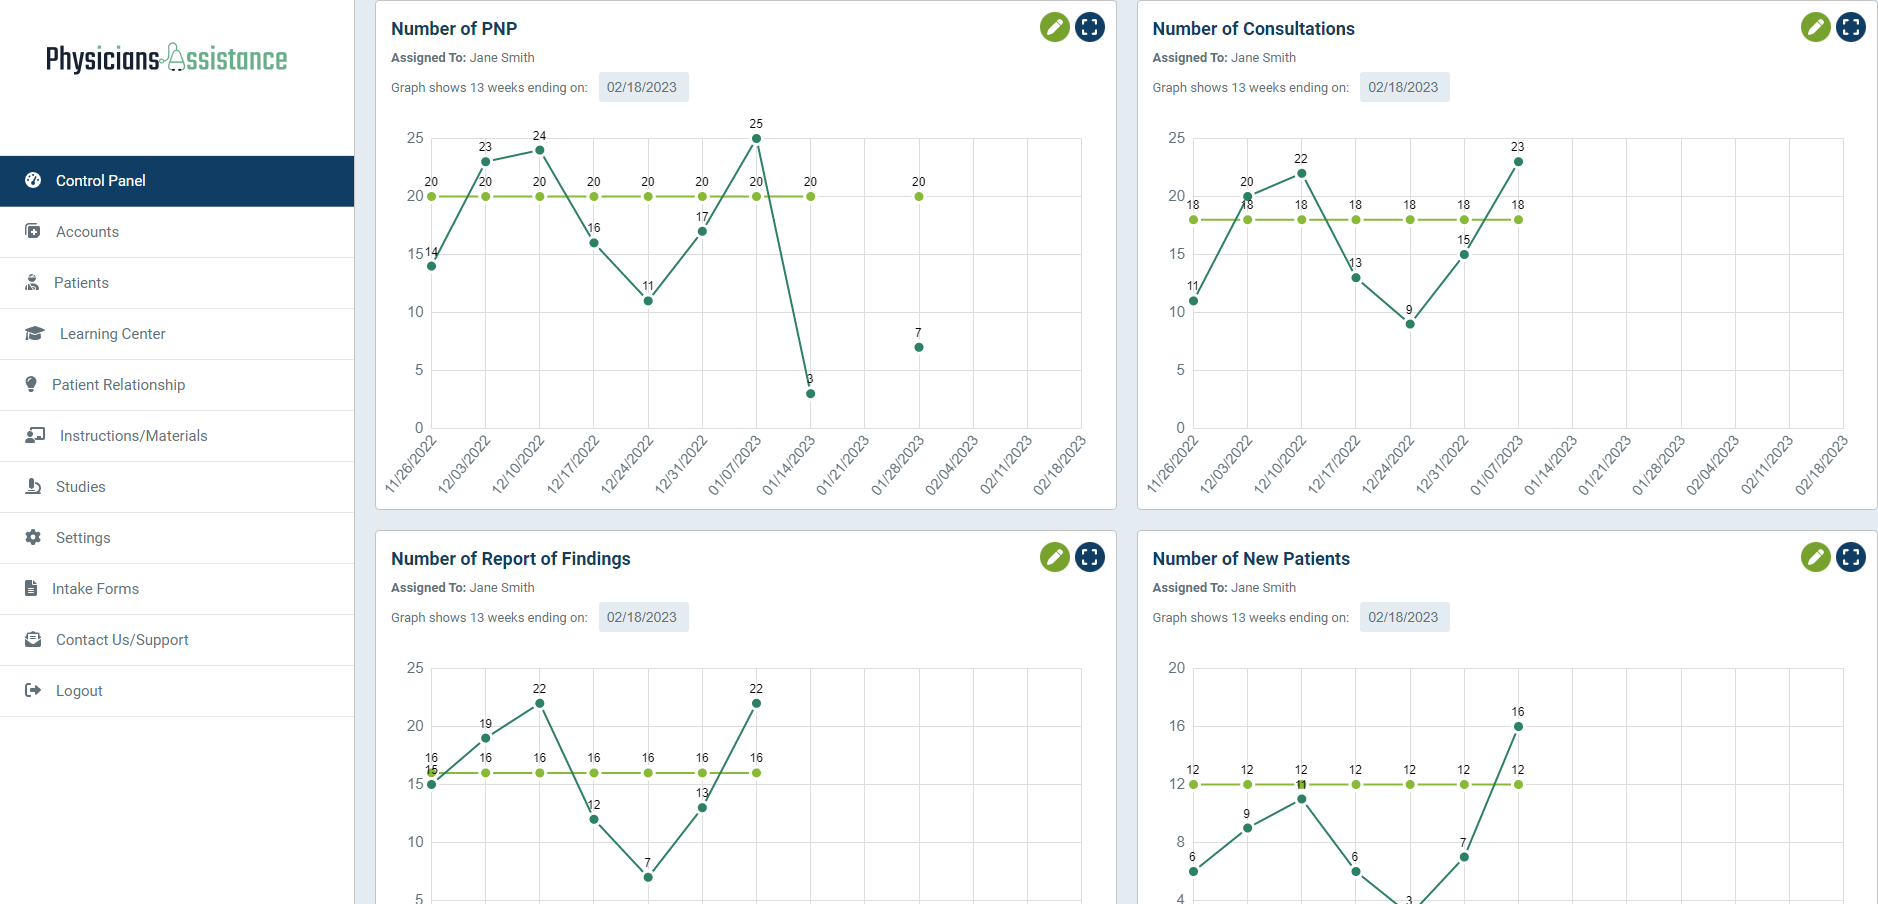 Physicians Assistance Stats Dashboard